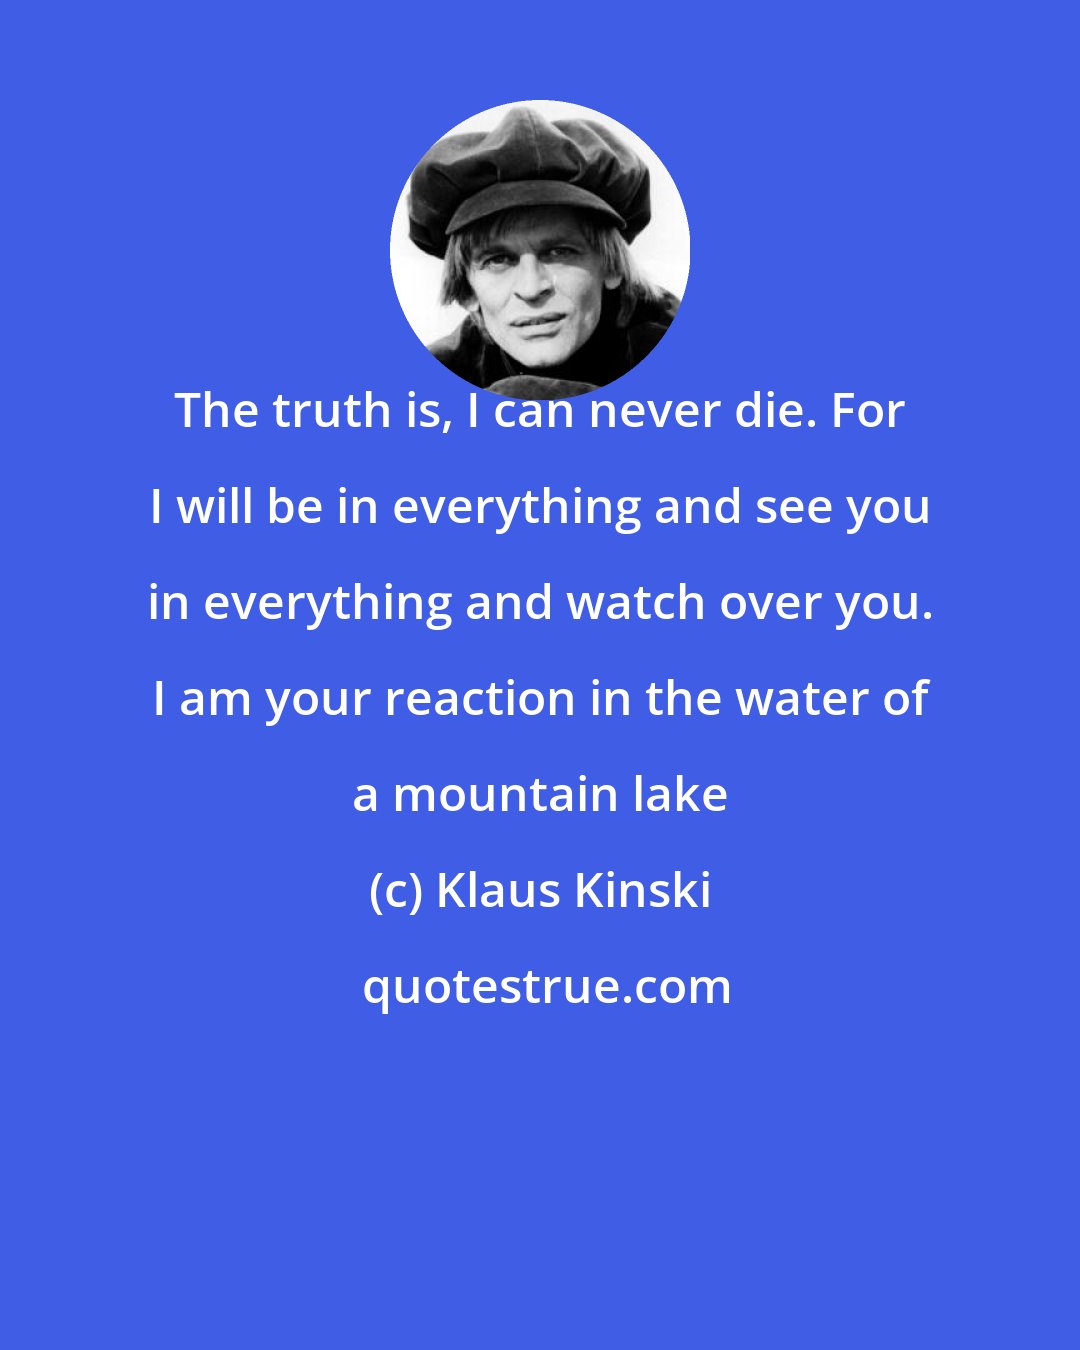 Klaus Kinski: The truth is, I can never die. For I will be in everything and see you in everything and watch over you. I am your reaction in the water of a mountain lake